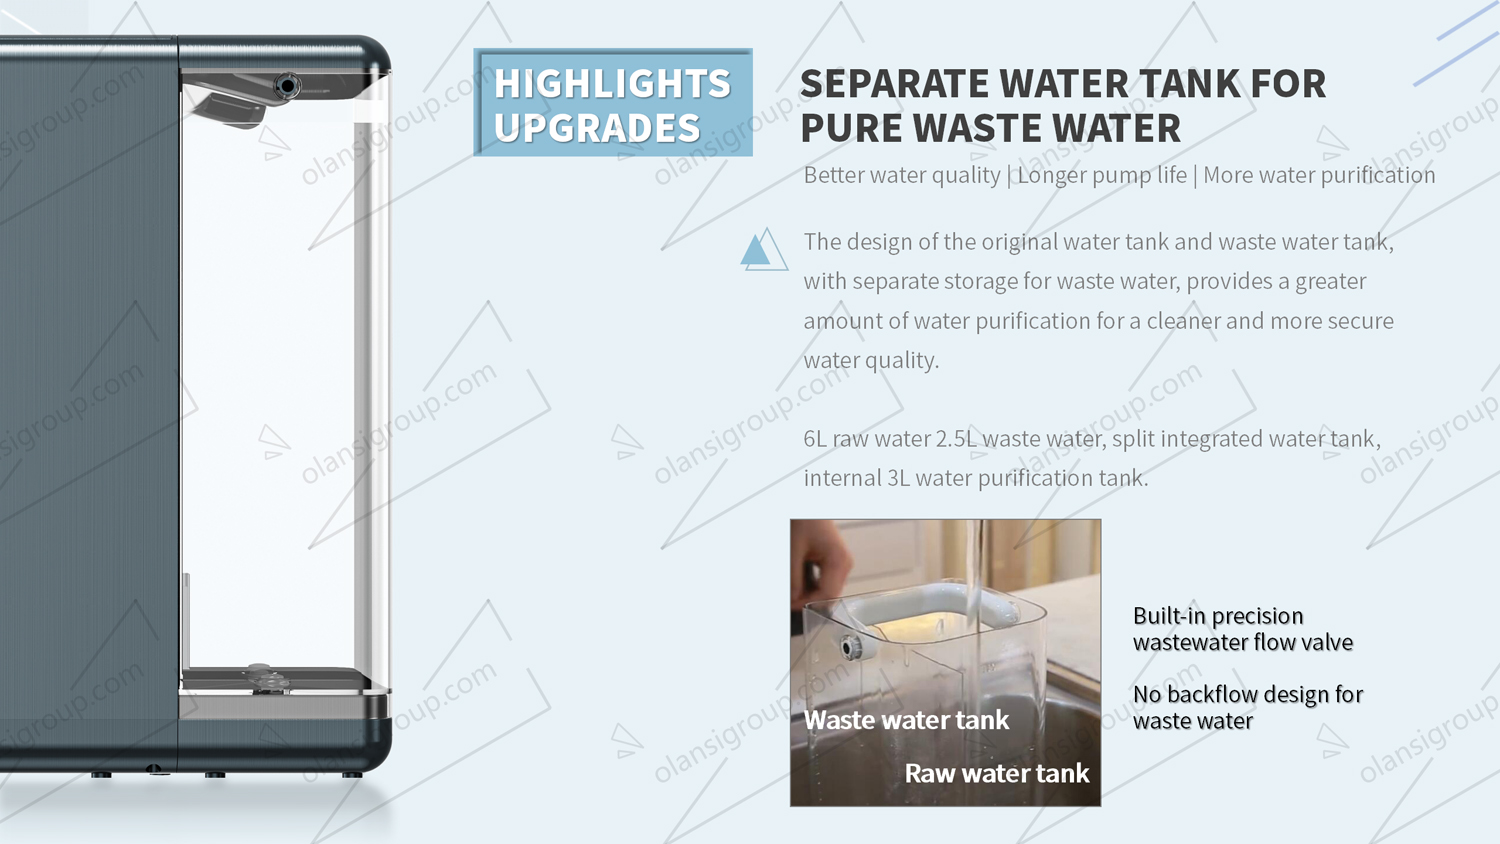 Ice and water purifier